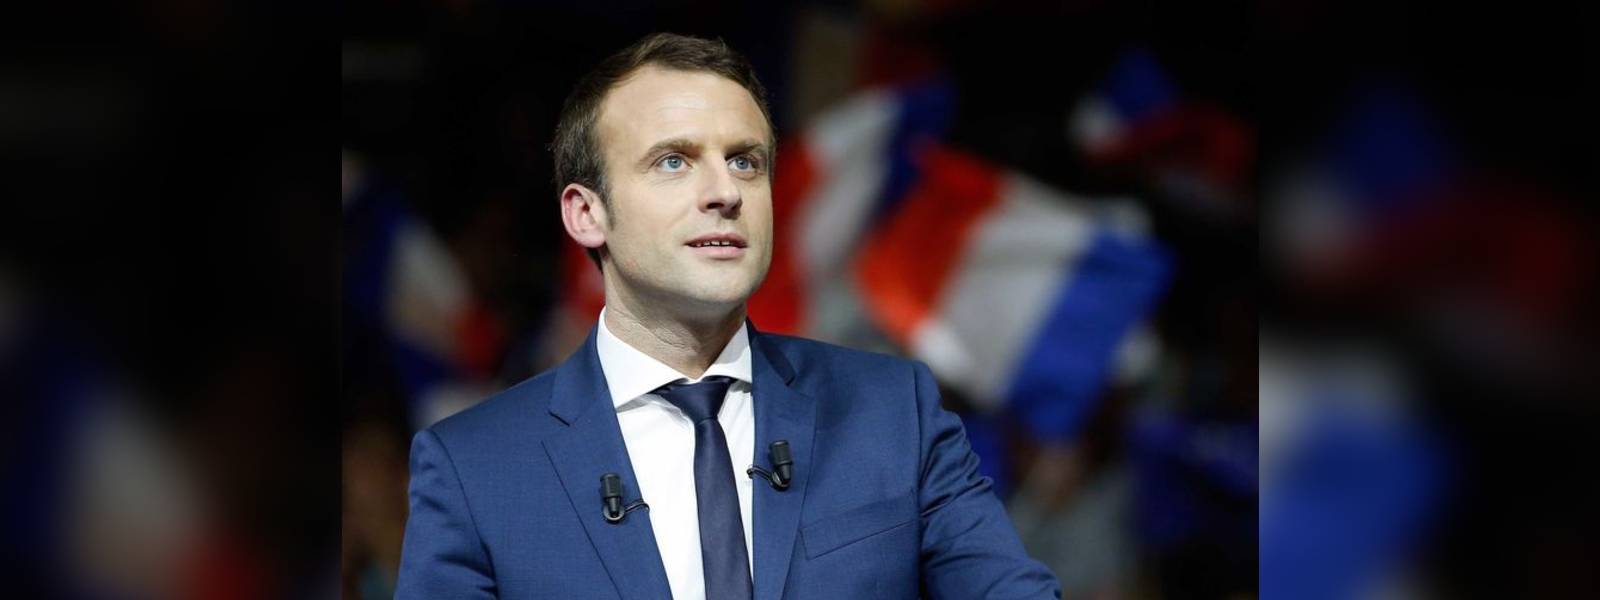 France's President Macron tests positive for Covid